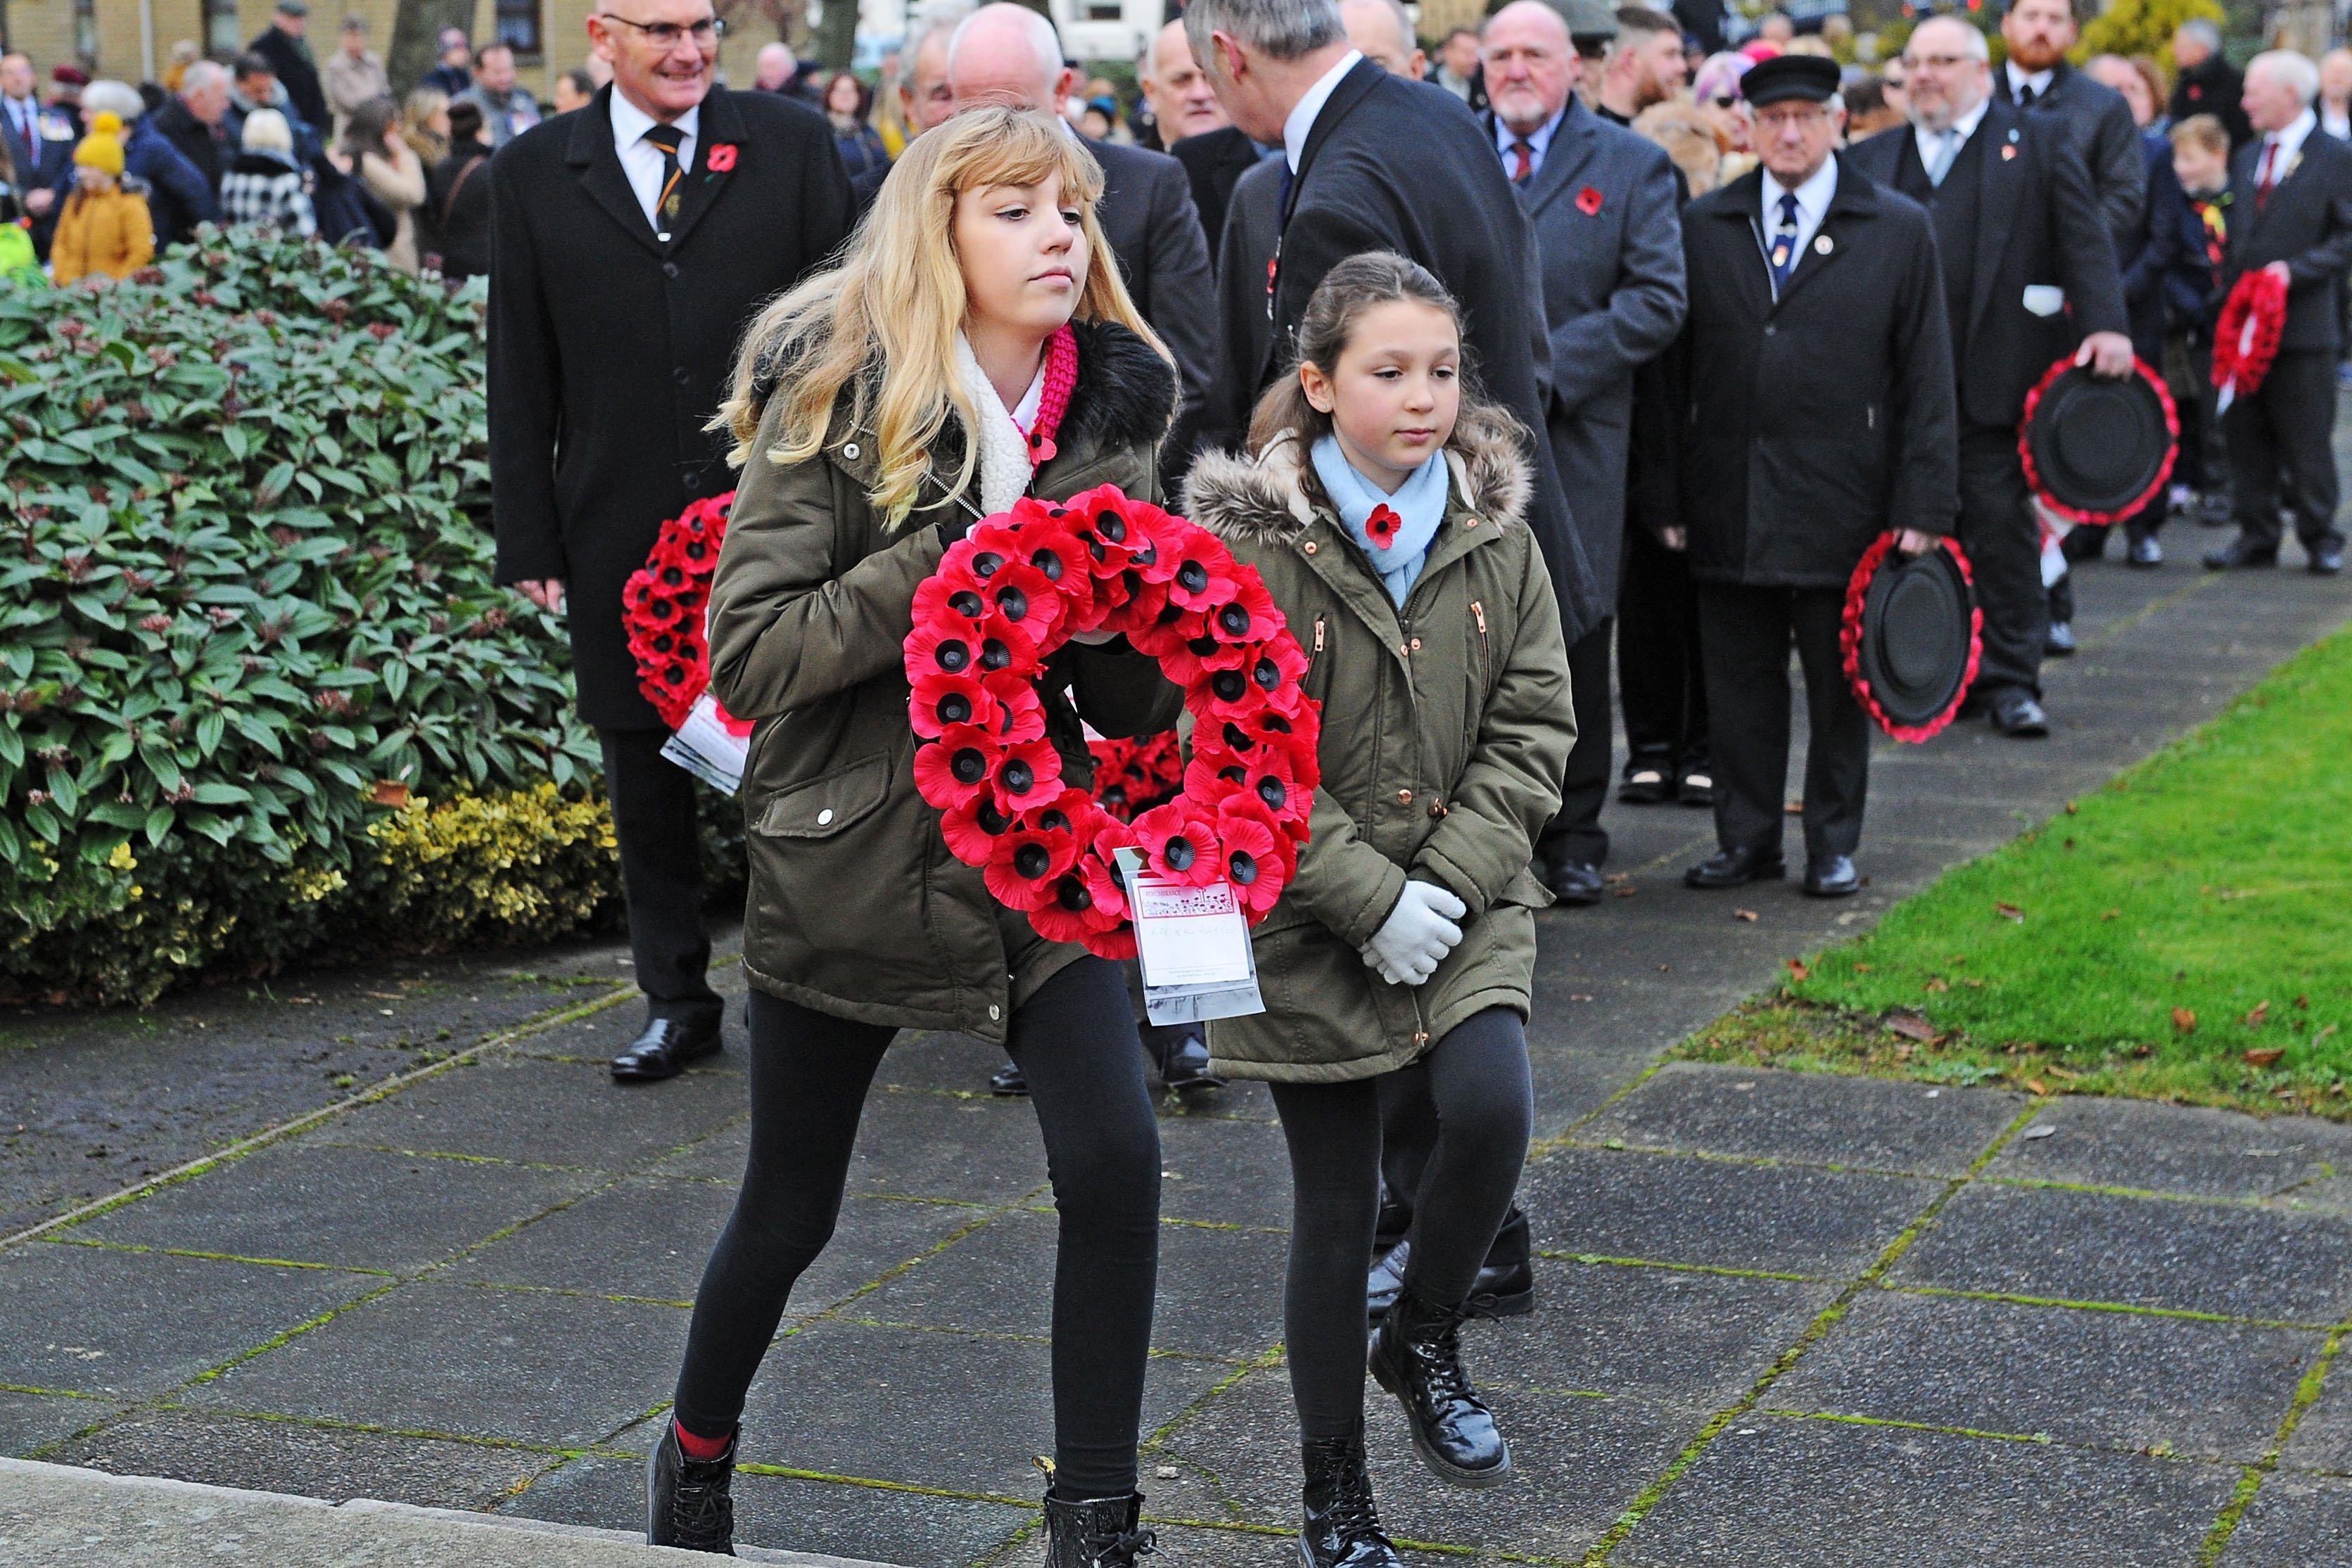 Grangemouth Remembrance Day Service at the war memorial in Zetland Park on Sunday, November 10.